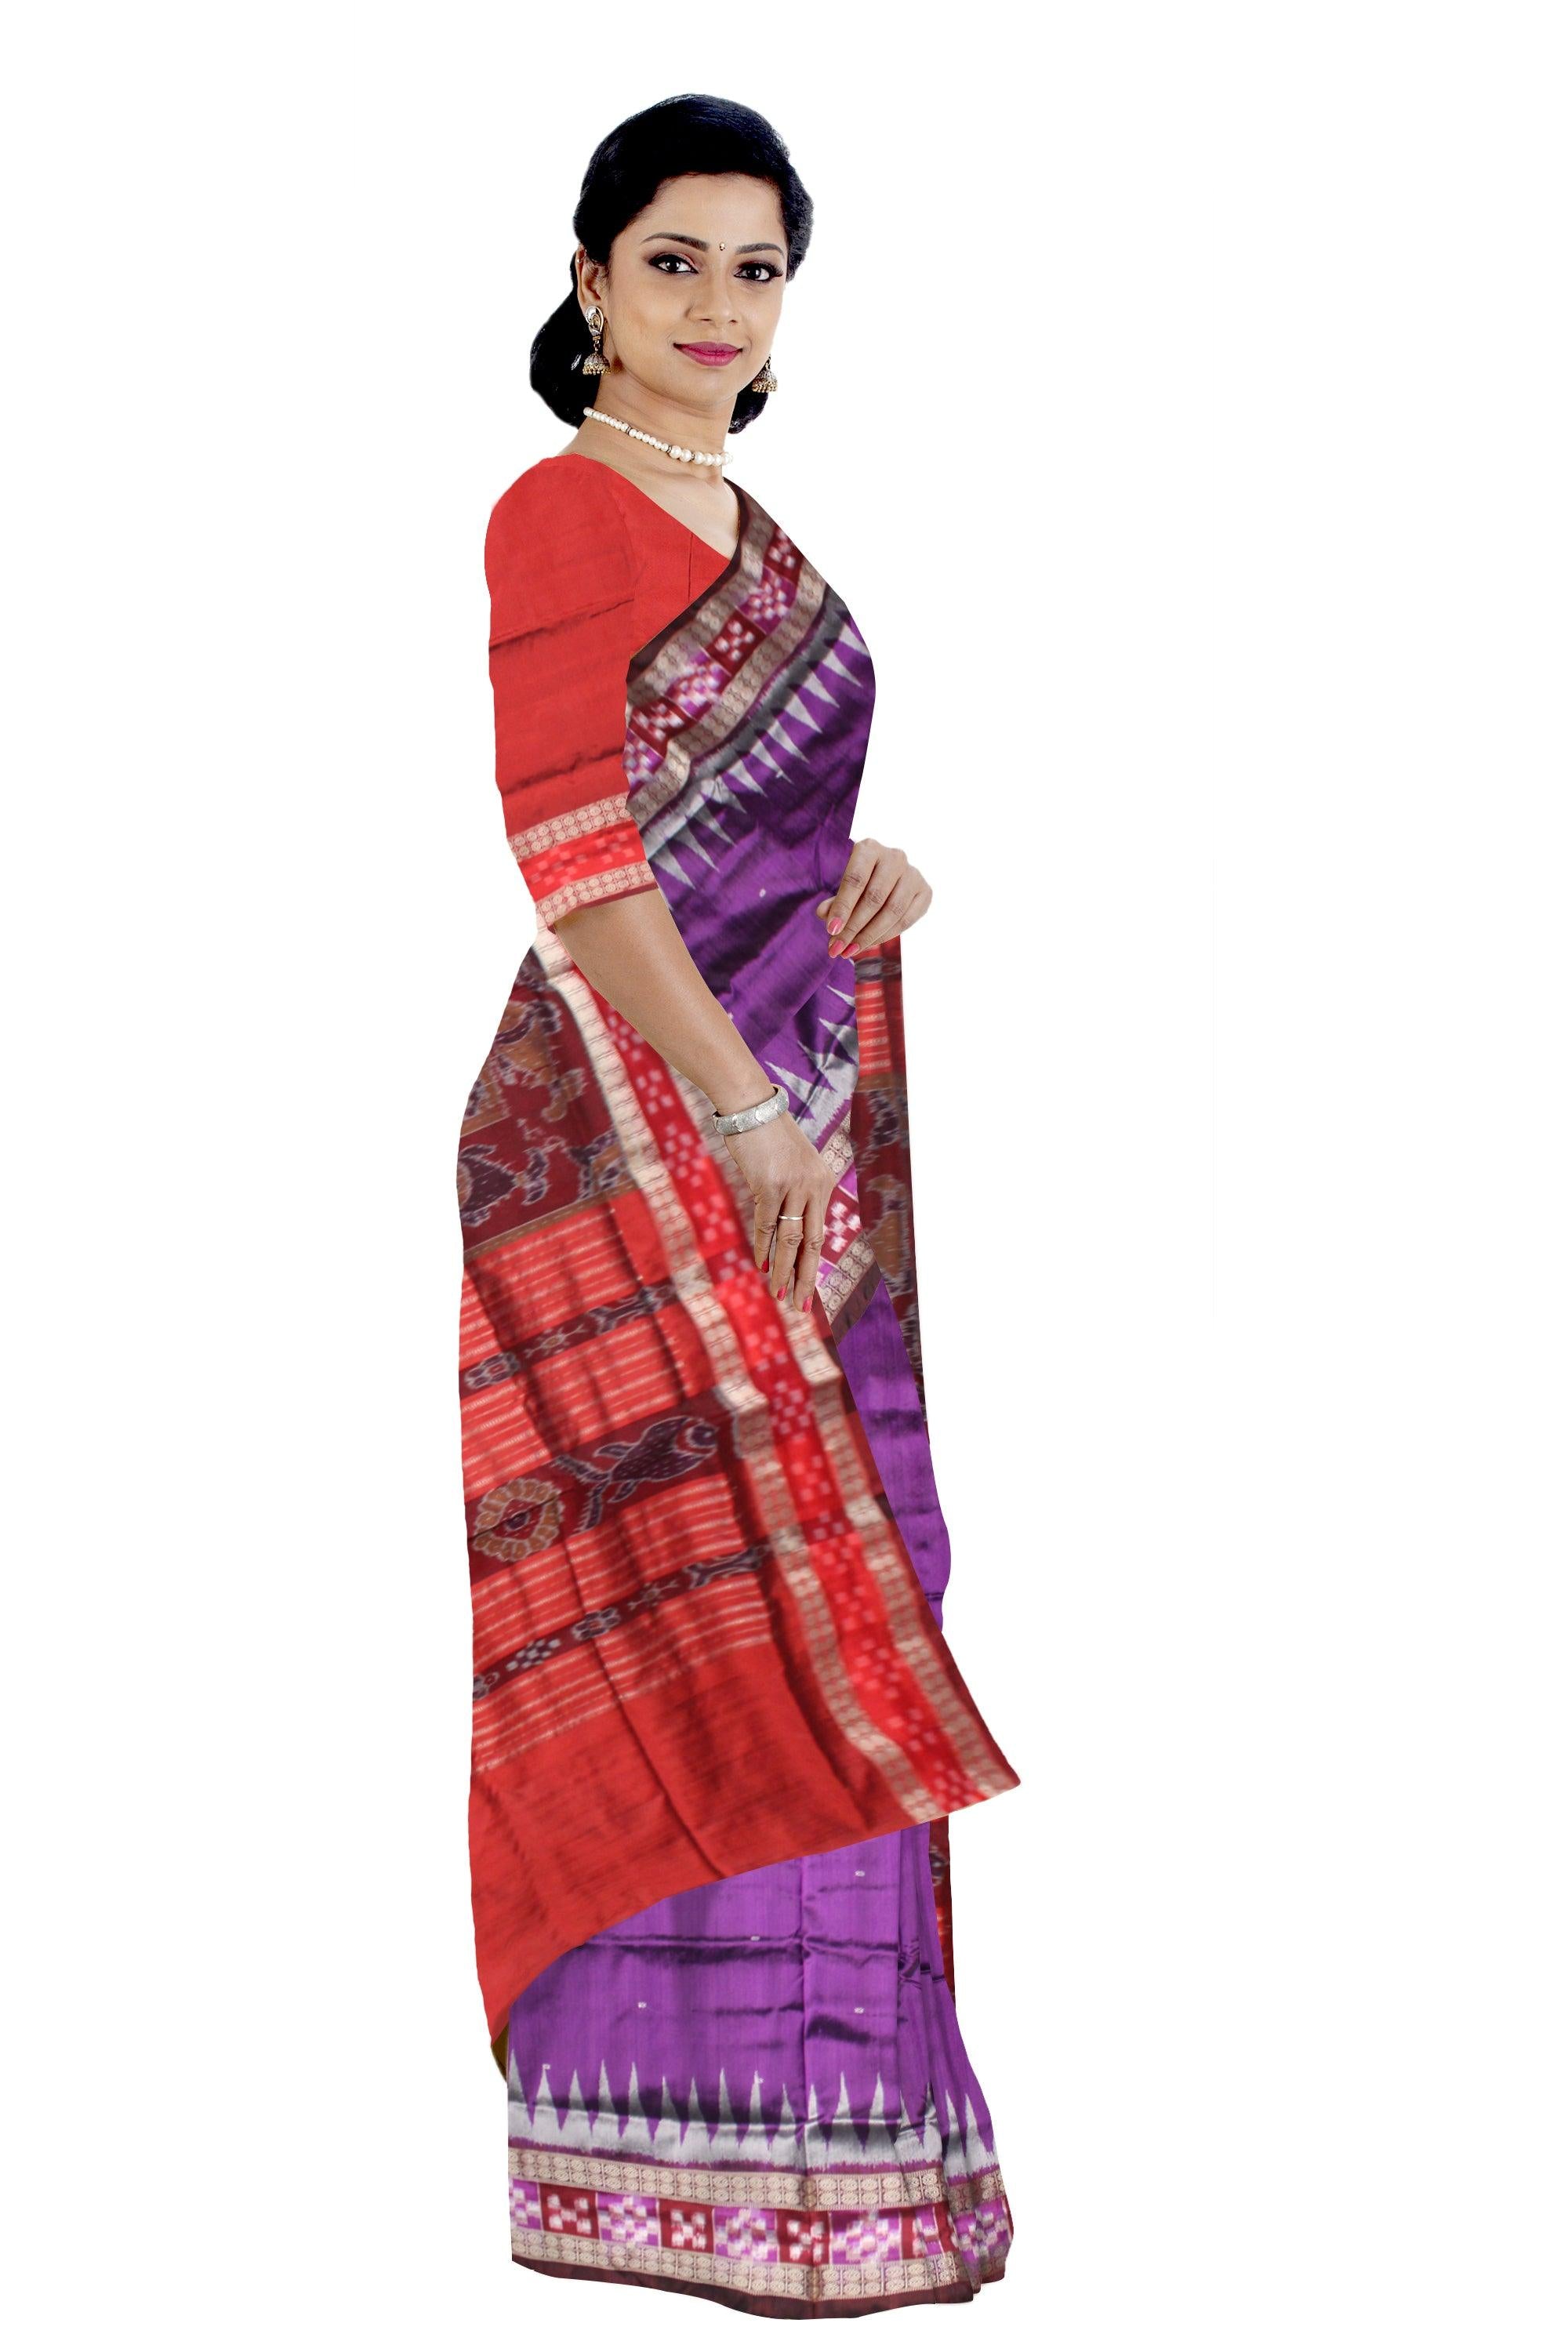 LATEST HANDWOVEN DHADI SAPTA PATA SAREE IS DARK VIOLET COLOR AND RED COLOR  BASE, ATTACHED WITH BLOUSE PIECE. - Koshali Arts & Crafts Enterprise